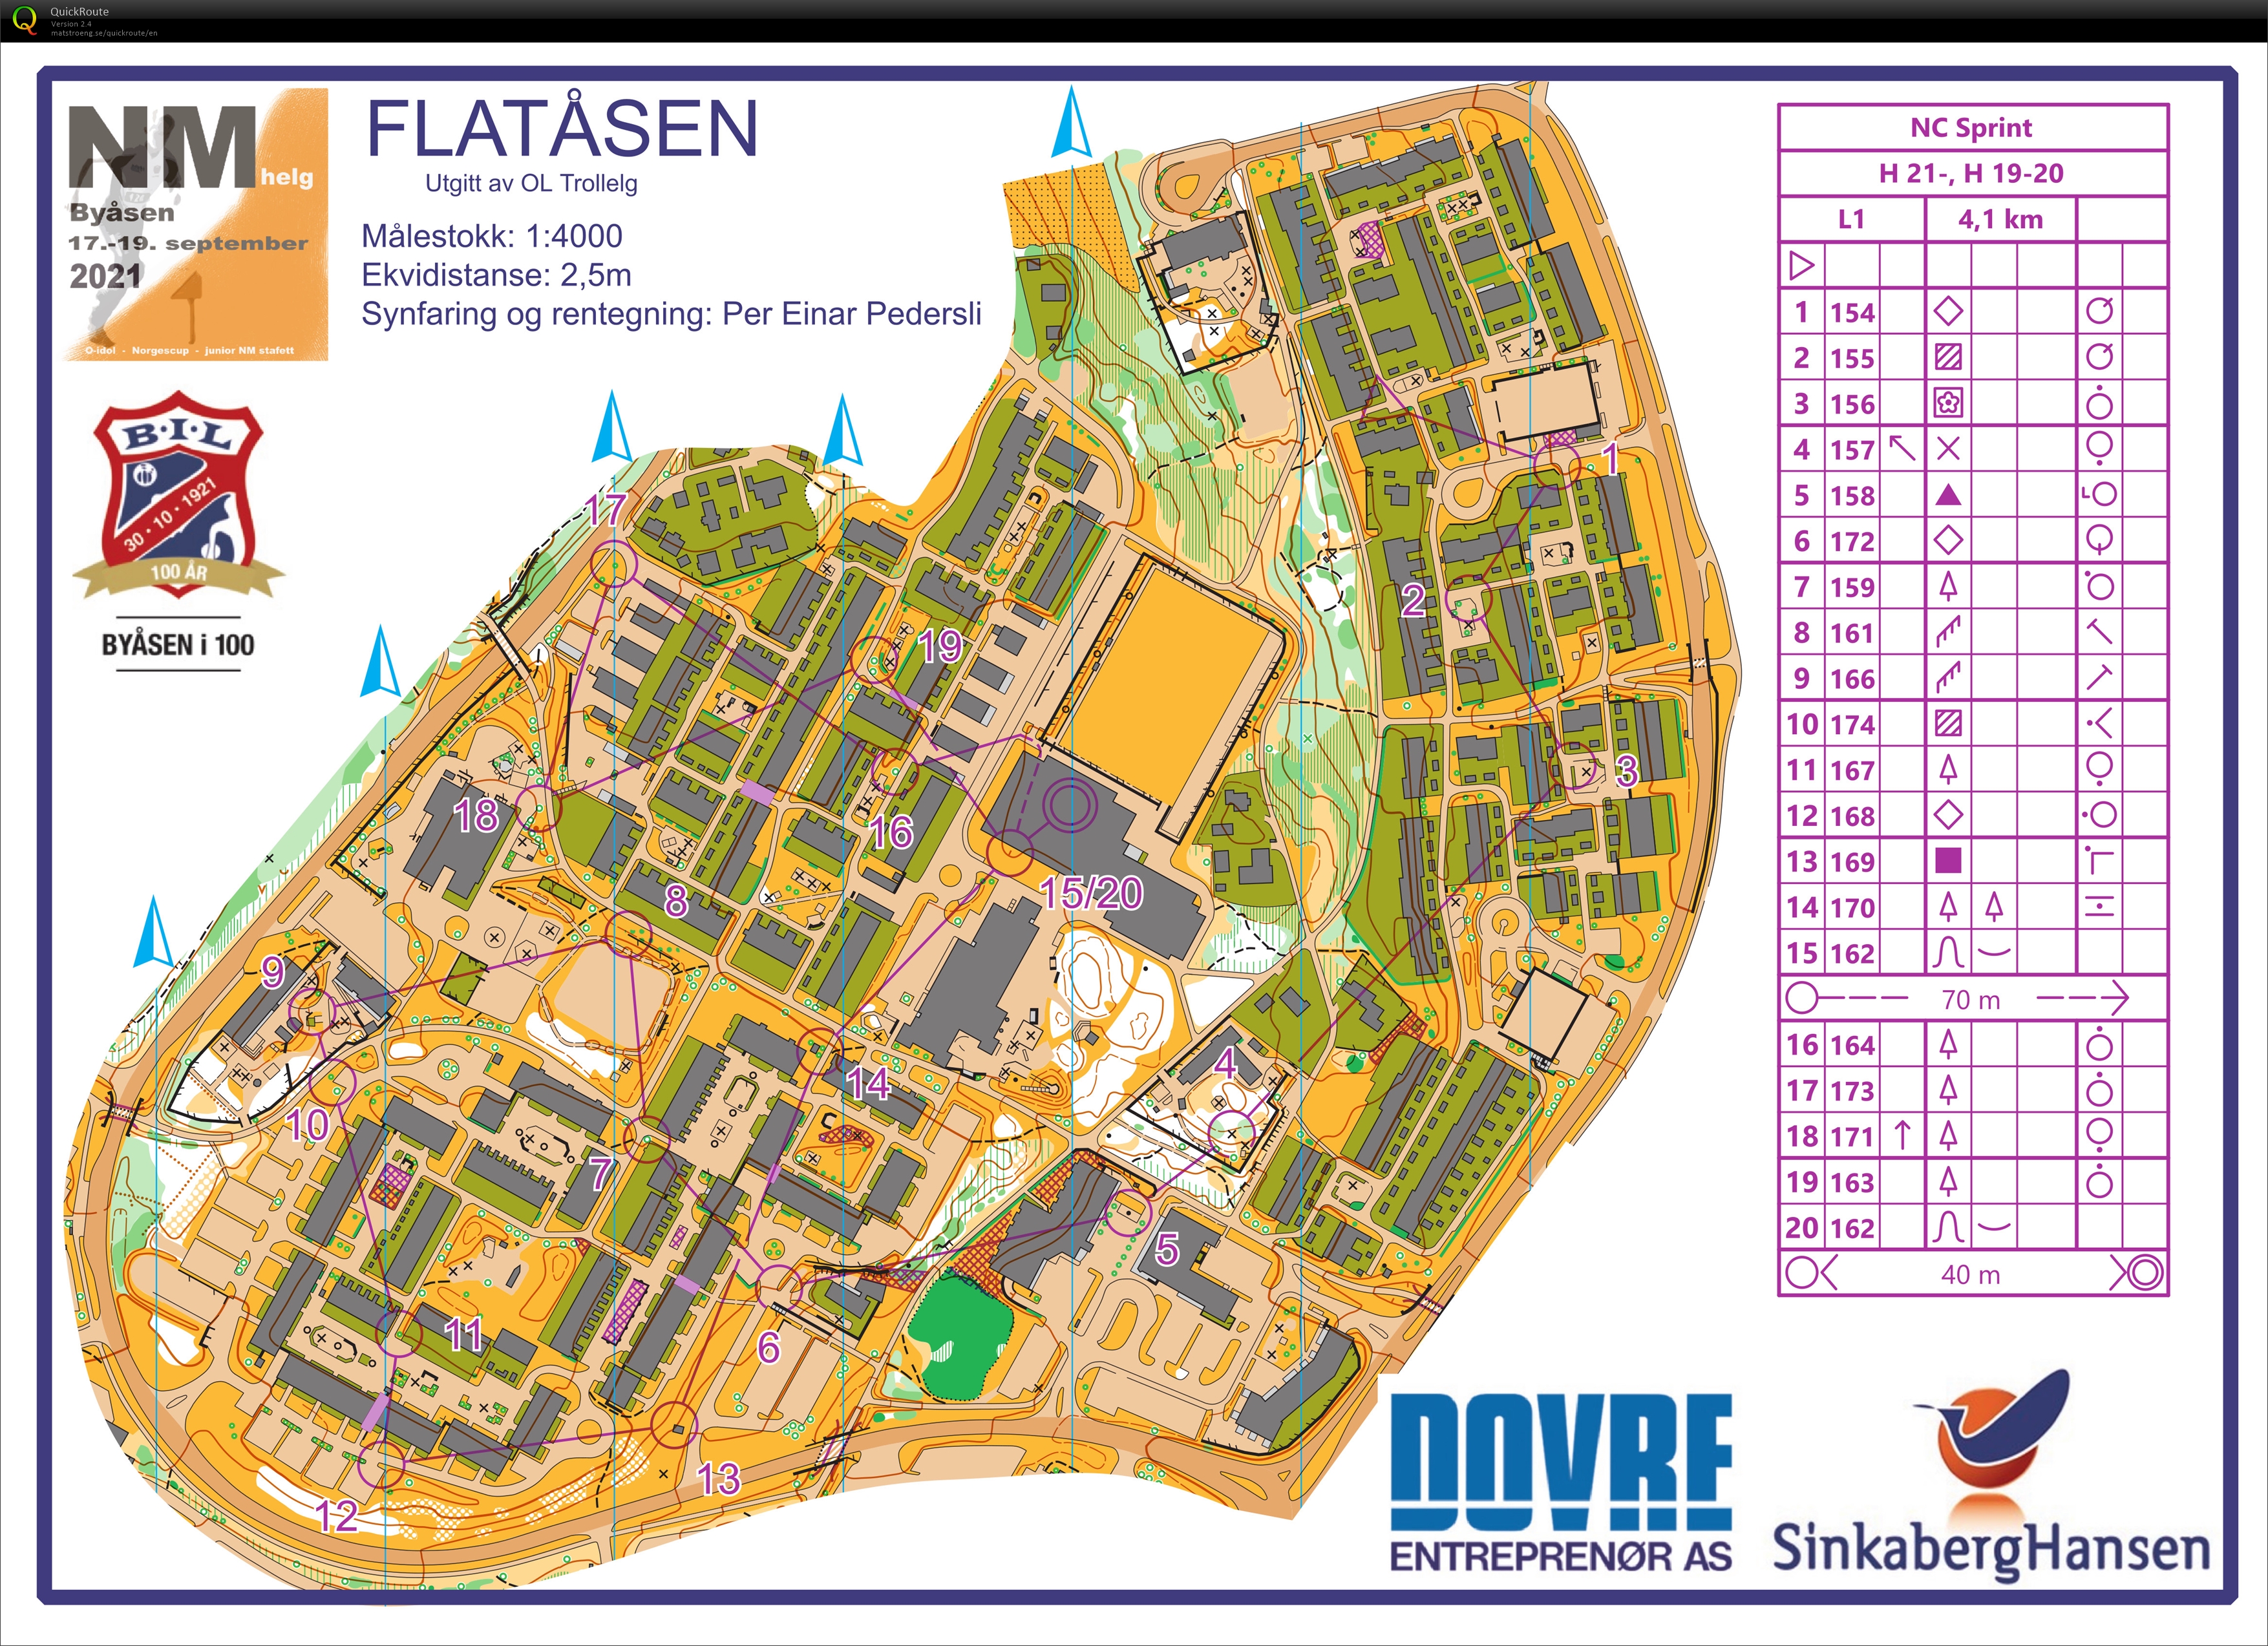 Norgescup Sprint (17.09.2021)